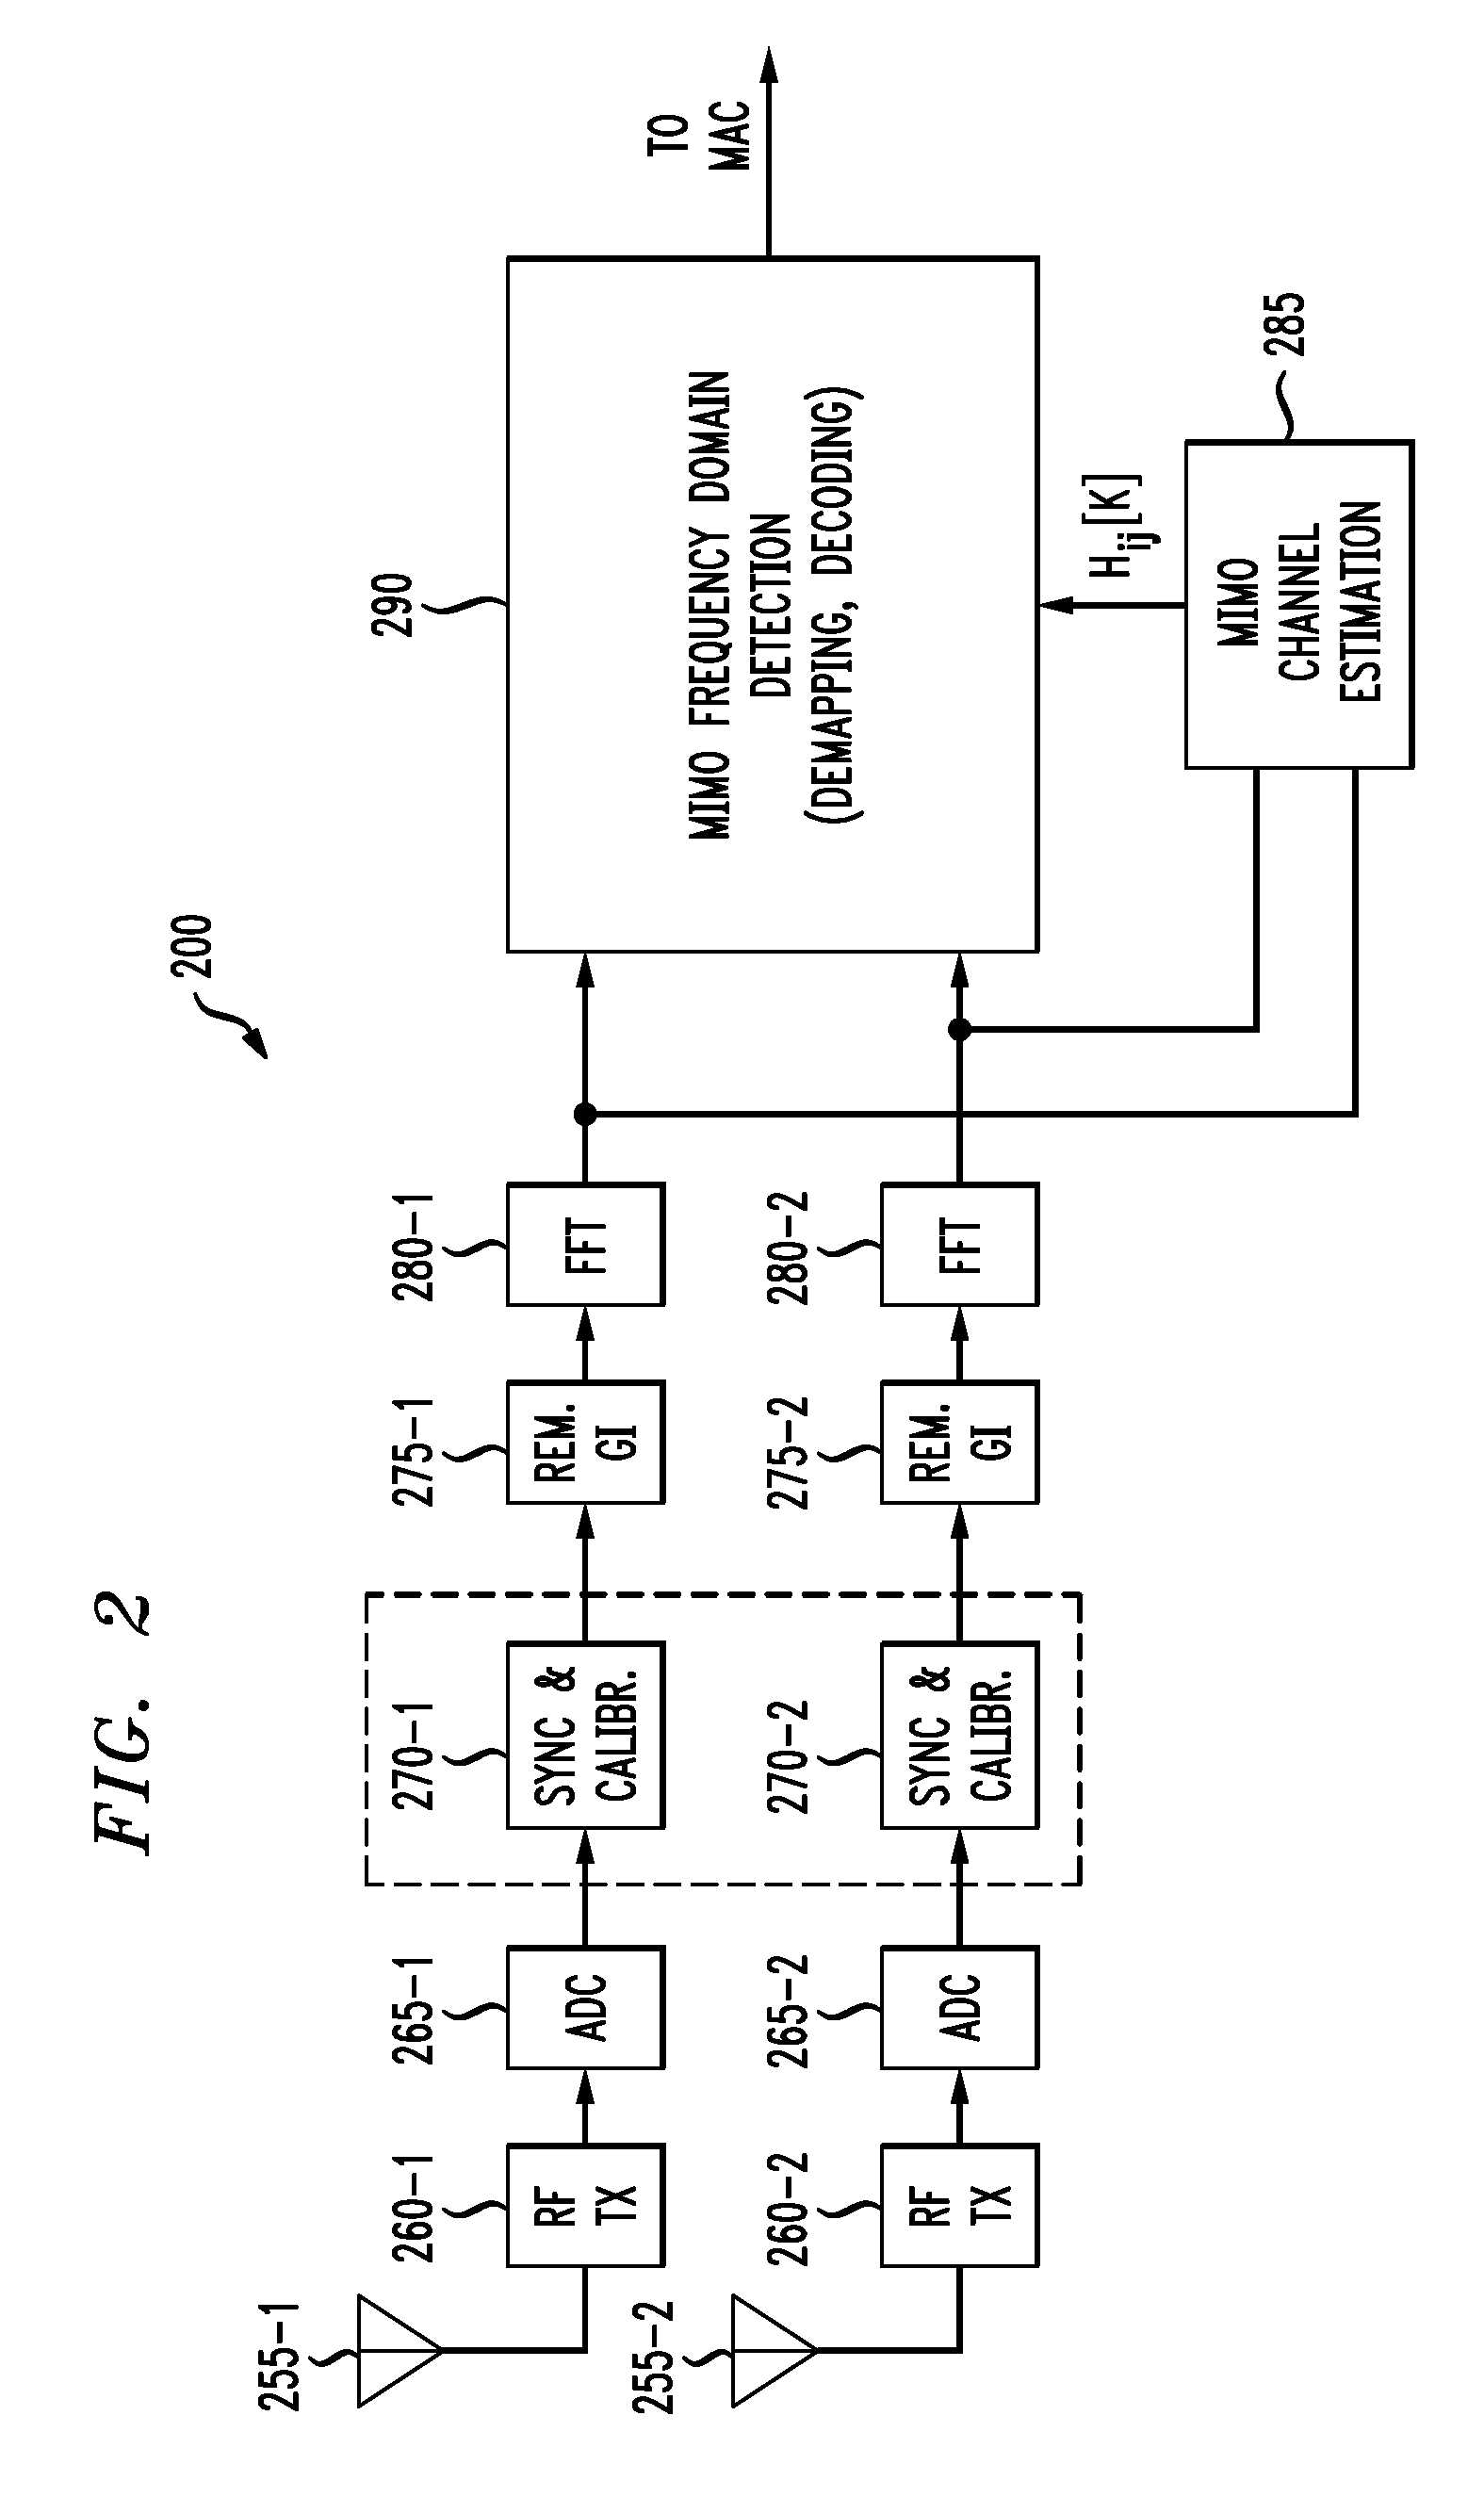 Method and apparatus for reducing power fluctuations during preamble training in a multiple antenna communication system using cyclic delays